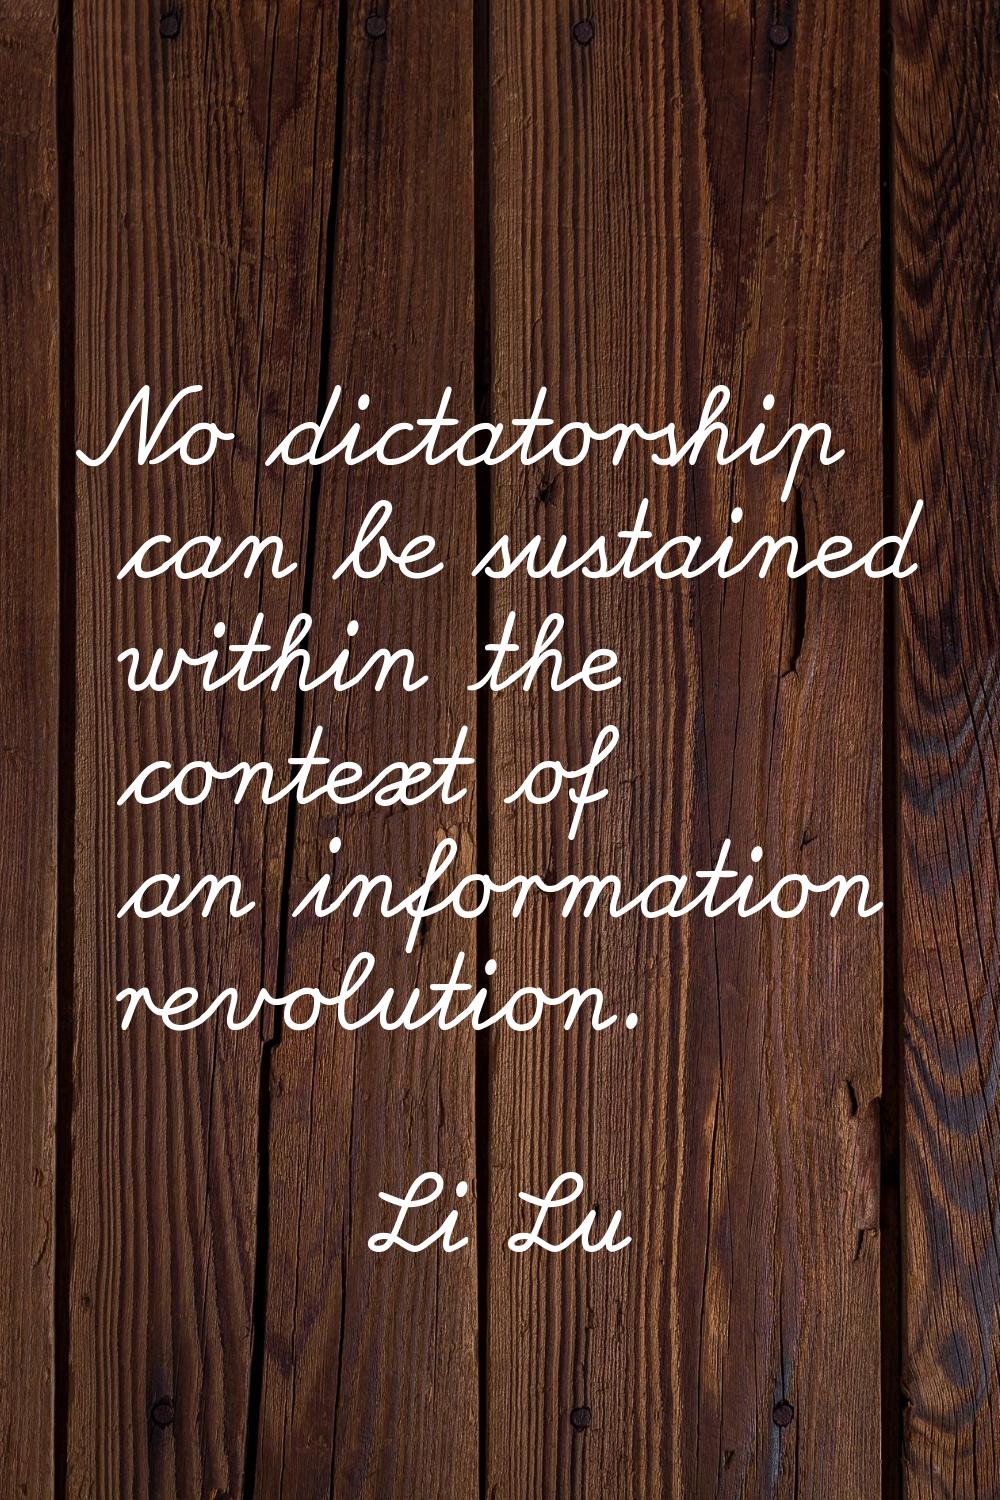 No dictatorship can be sustained within the context of an information revolution.